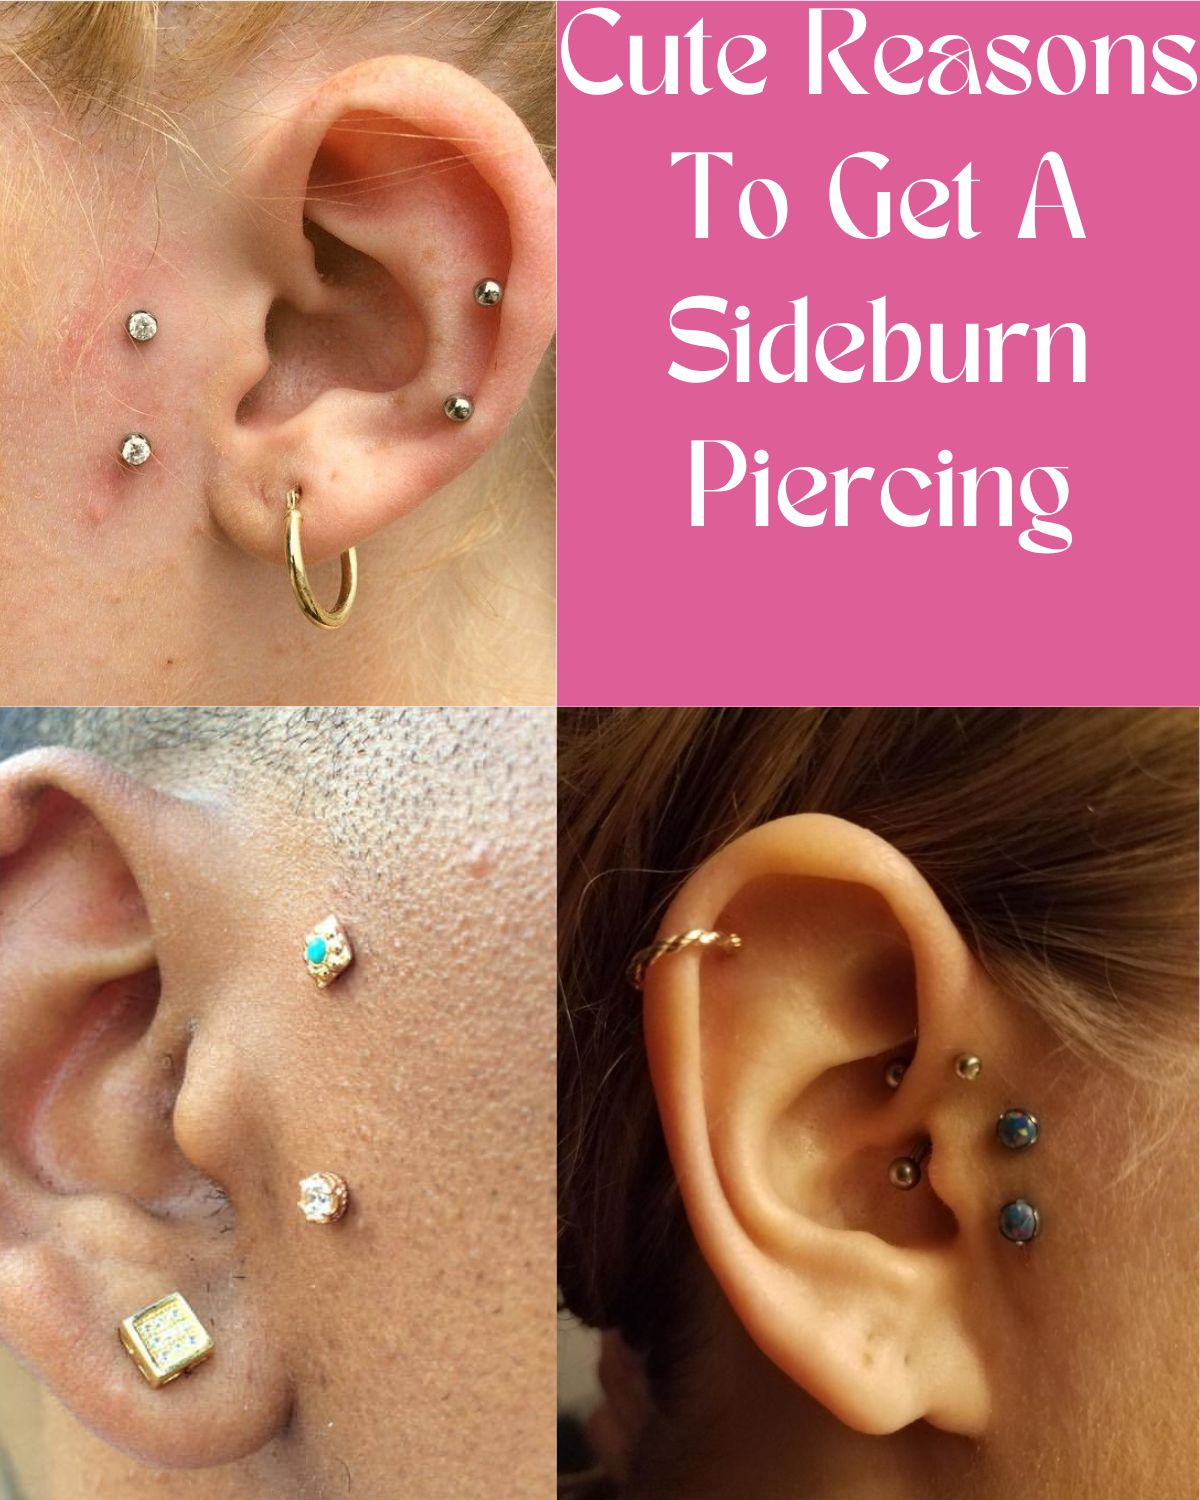 Why you should get a sideburn piercing this year